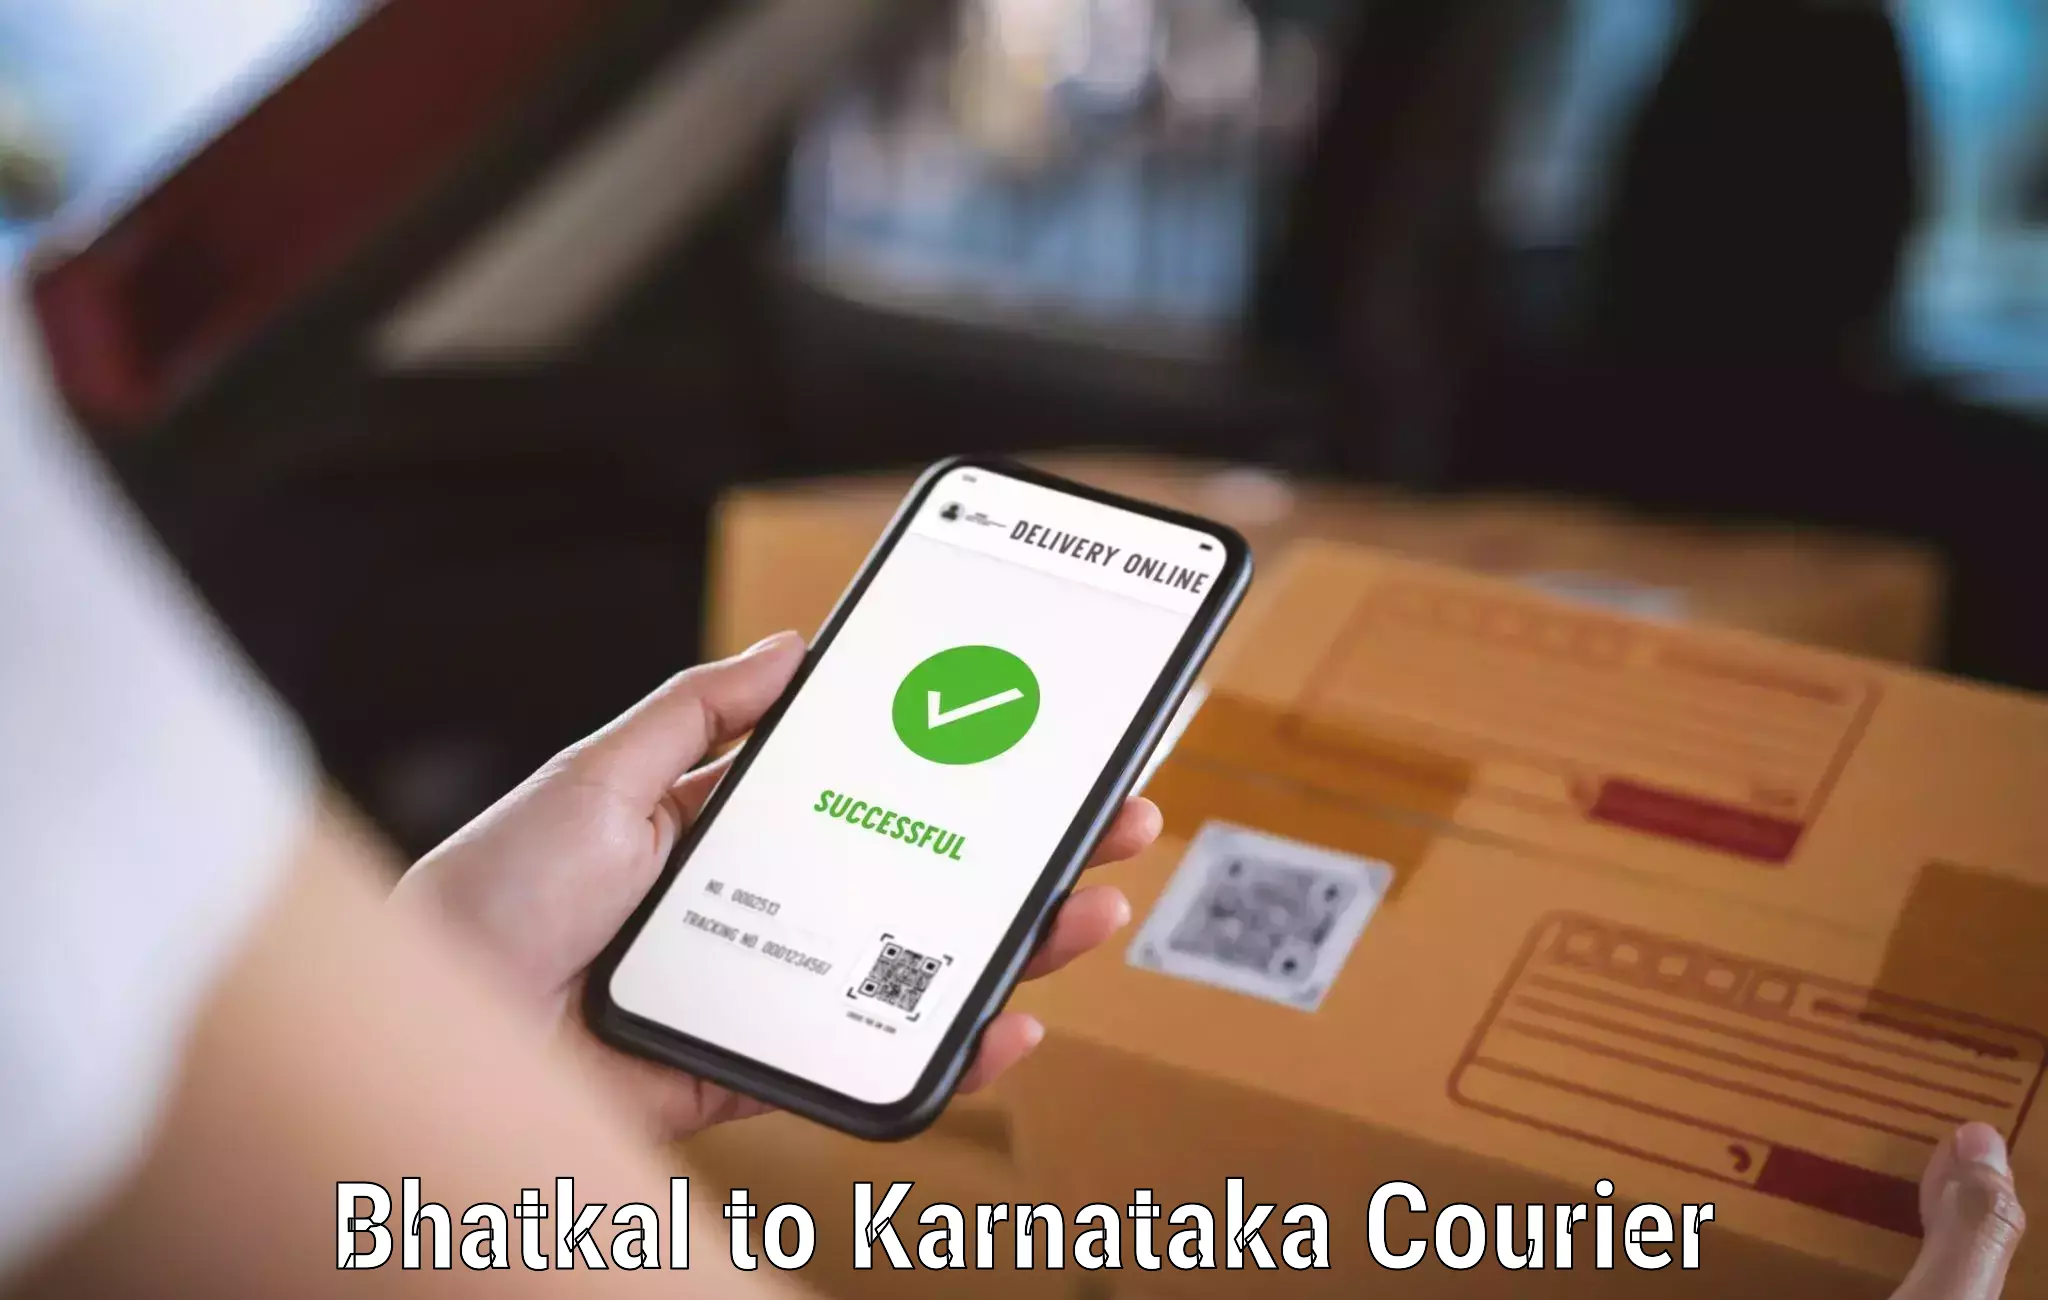 Courier service efficiency Bhatkal to Kollegal